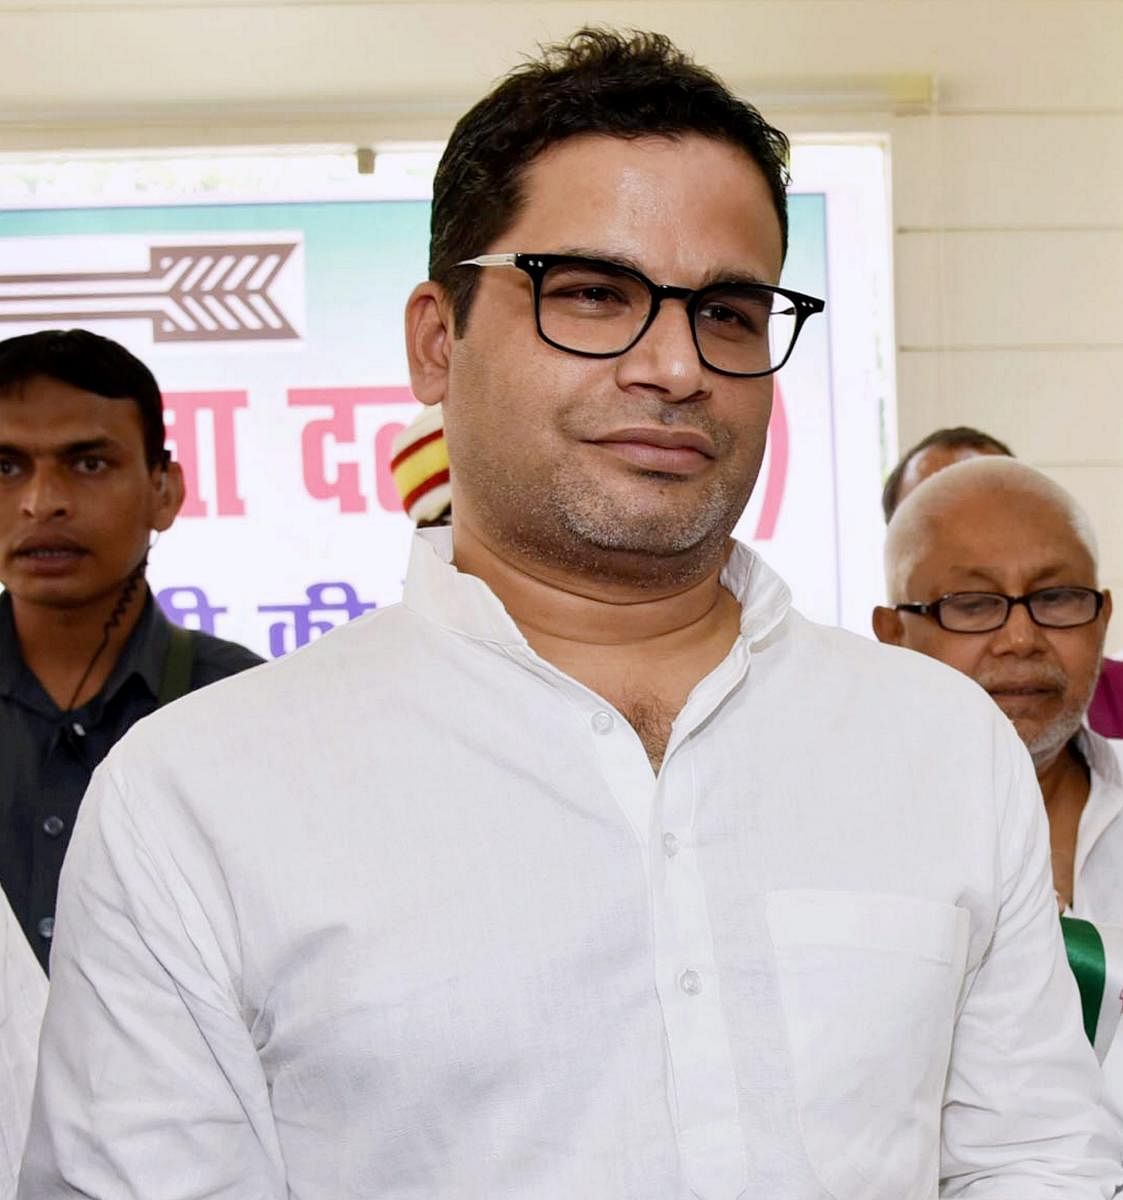 According to sources, the party has reached out to Prashant Kishor, who was suspended by the JD(U) for indiscipline. (DH File Photo)